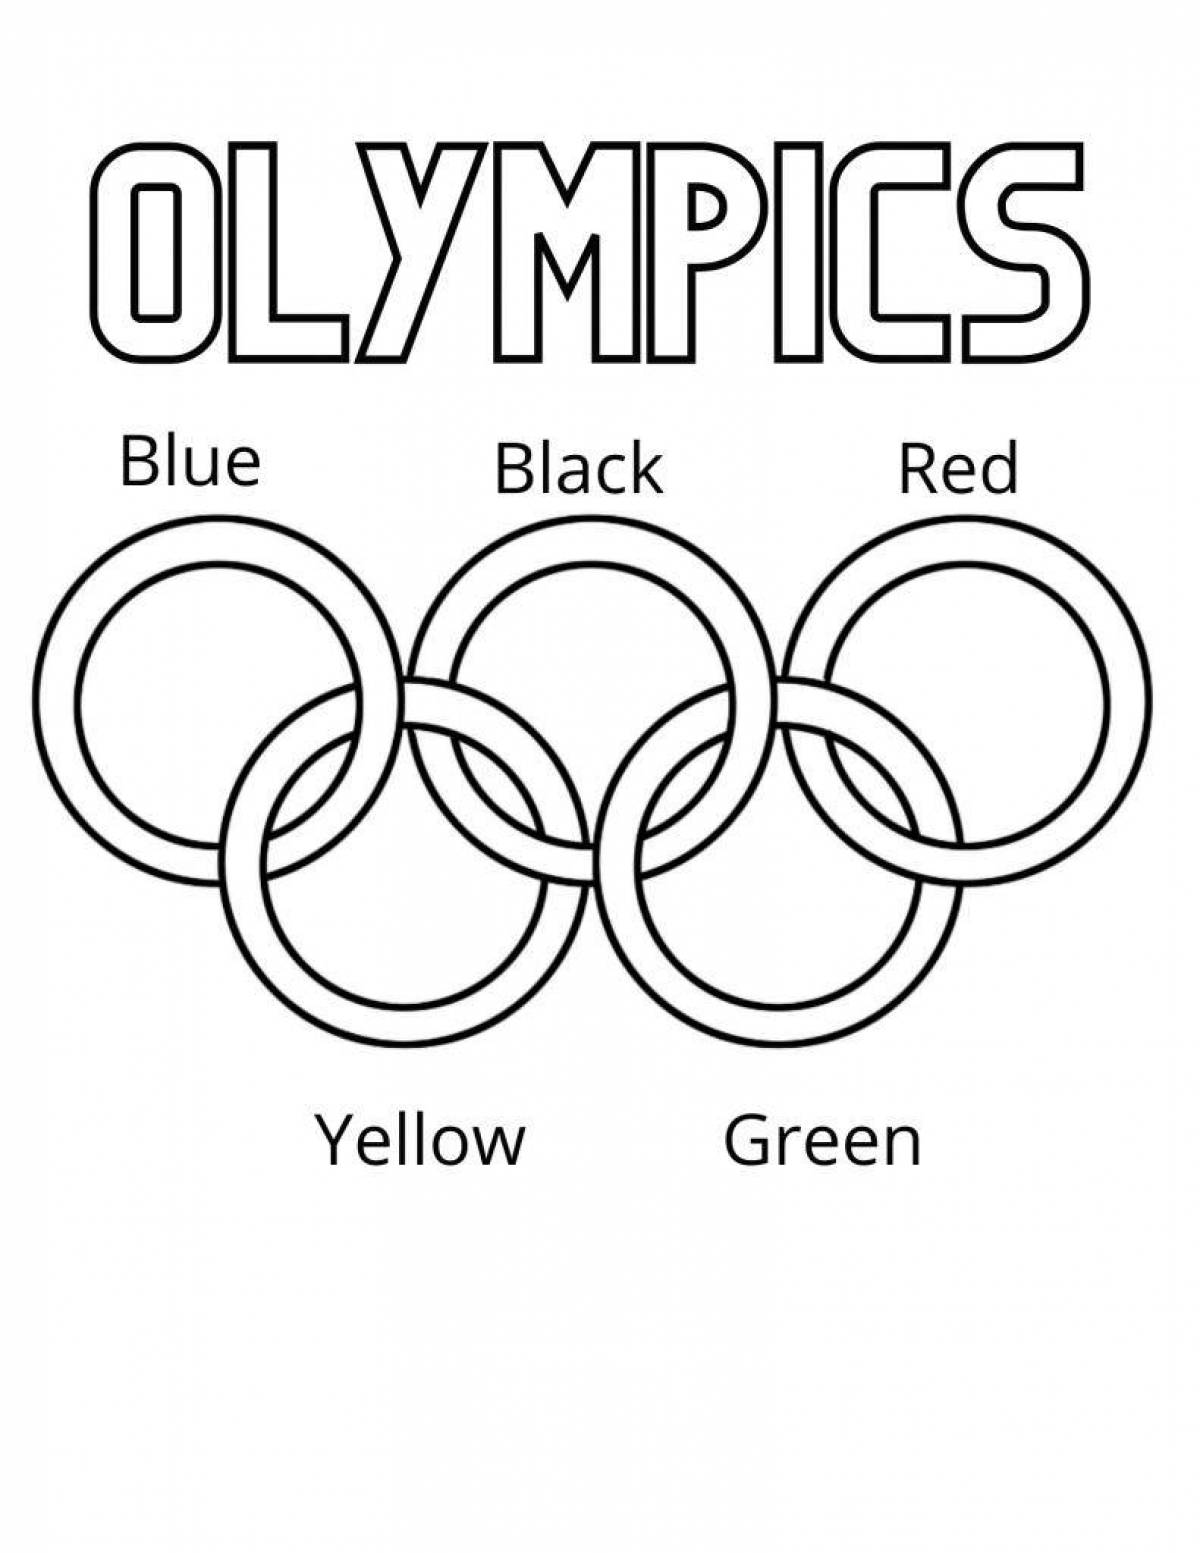 Bright coloring winter olympic games